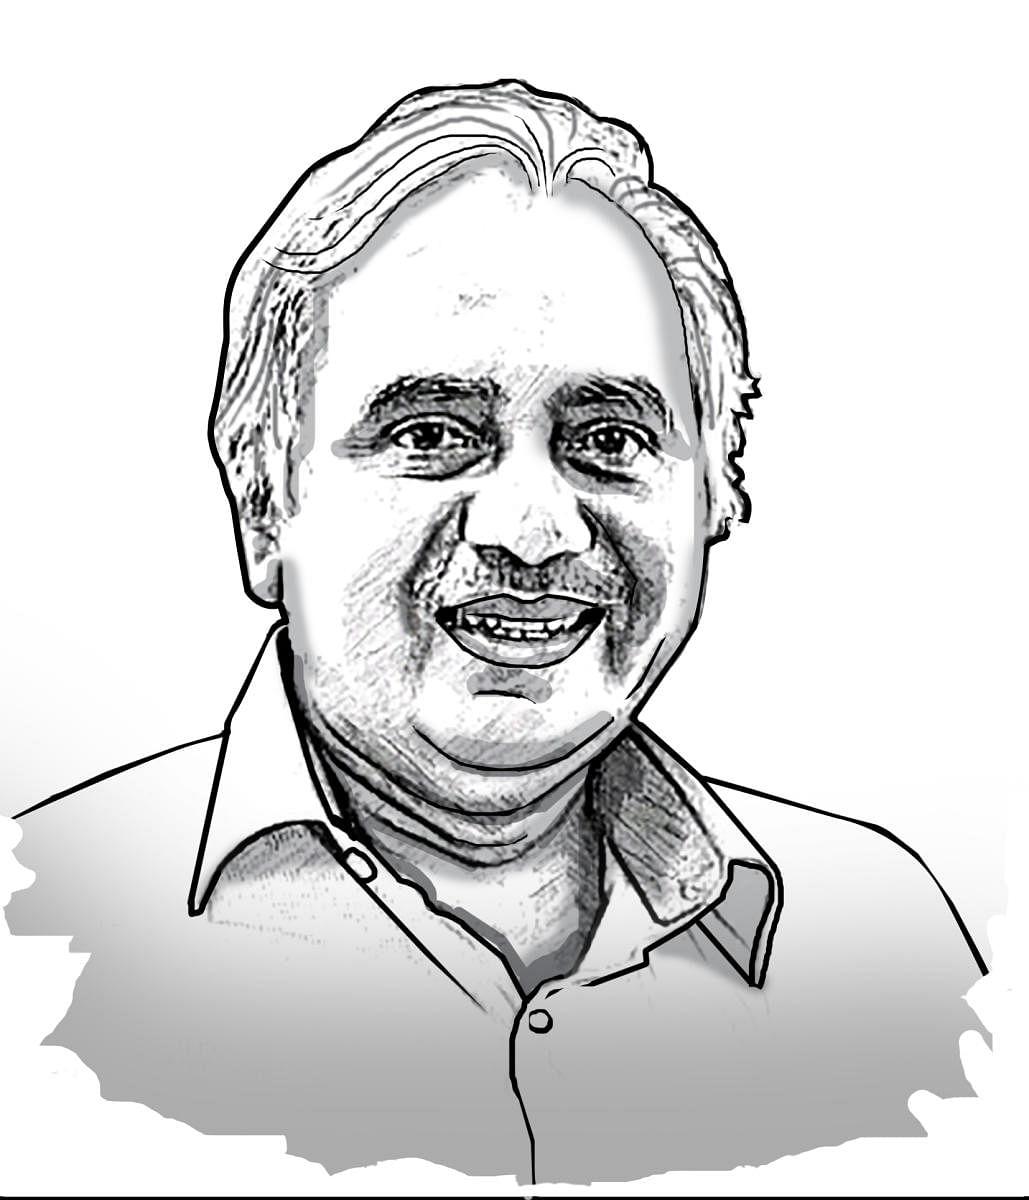 Seshadri Chari reads between the lines on big national and international developments from his vantage point in the BJP National Executive and the RSS @seshadrichari